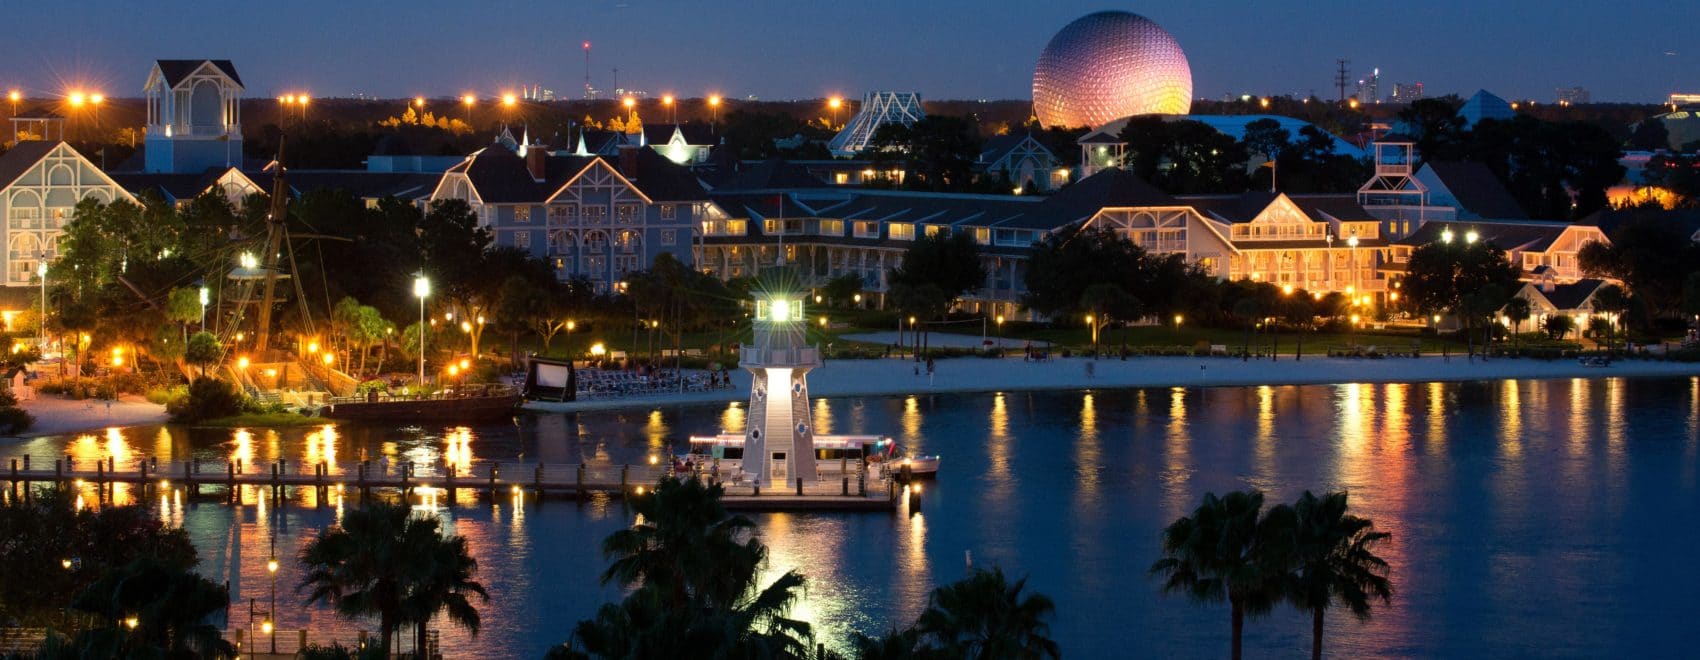 Walt Disney World's beautiful Beach Club resort lit up at night, with Epcot visible in the background